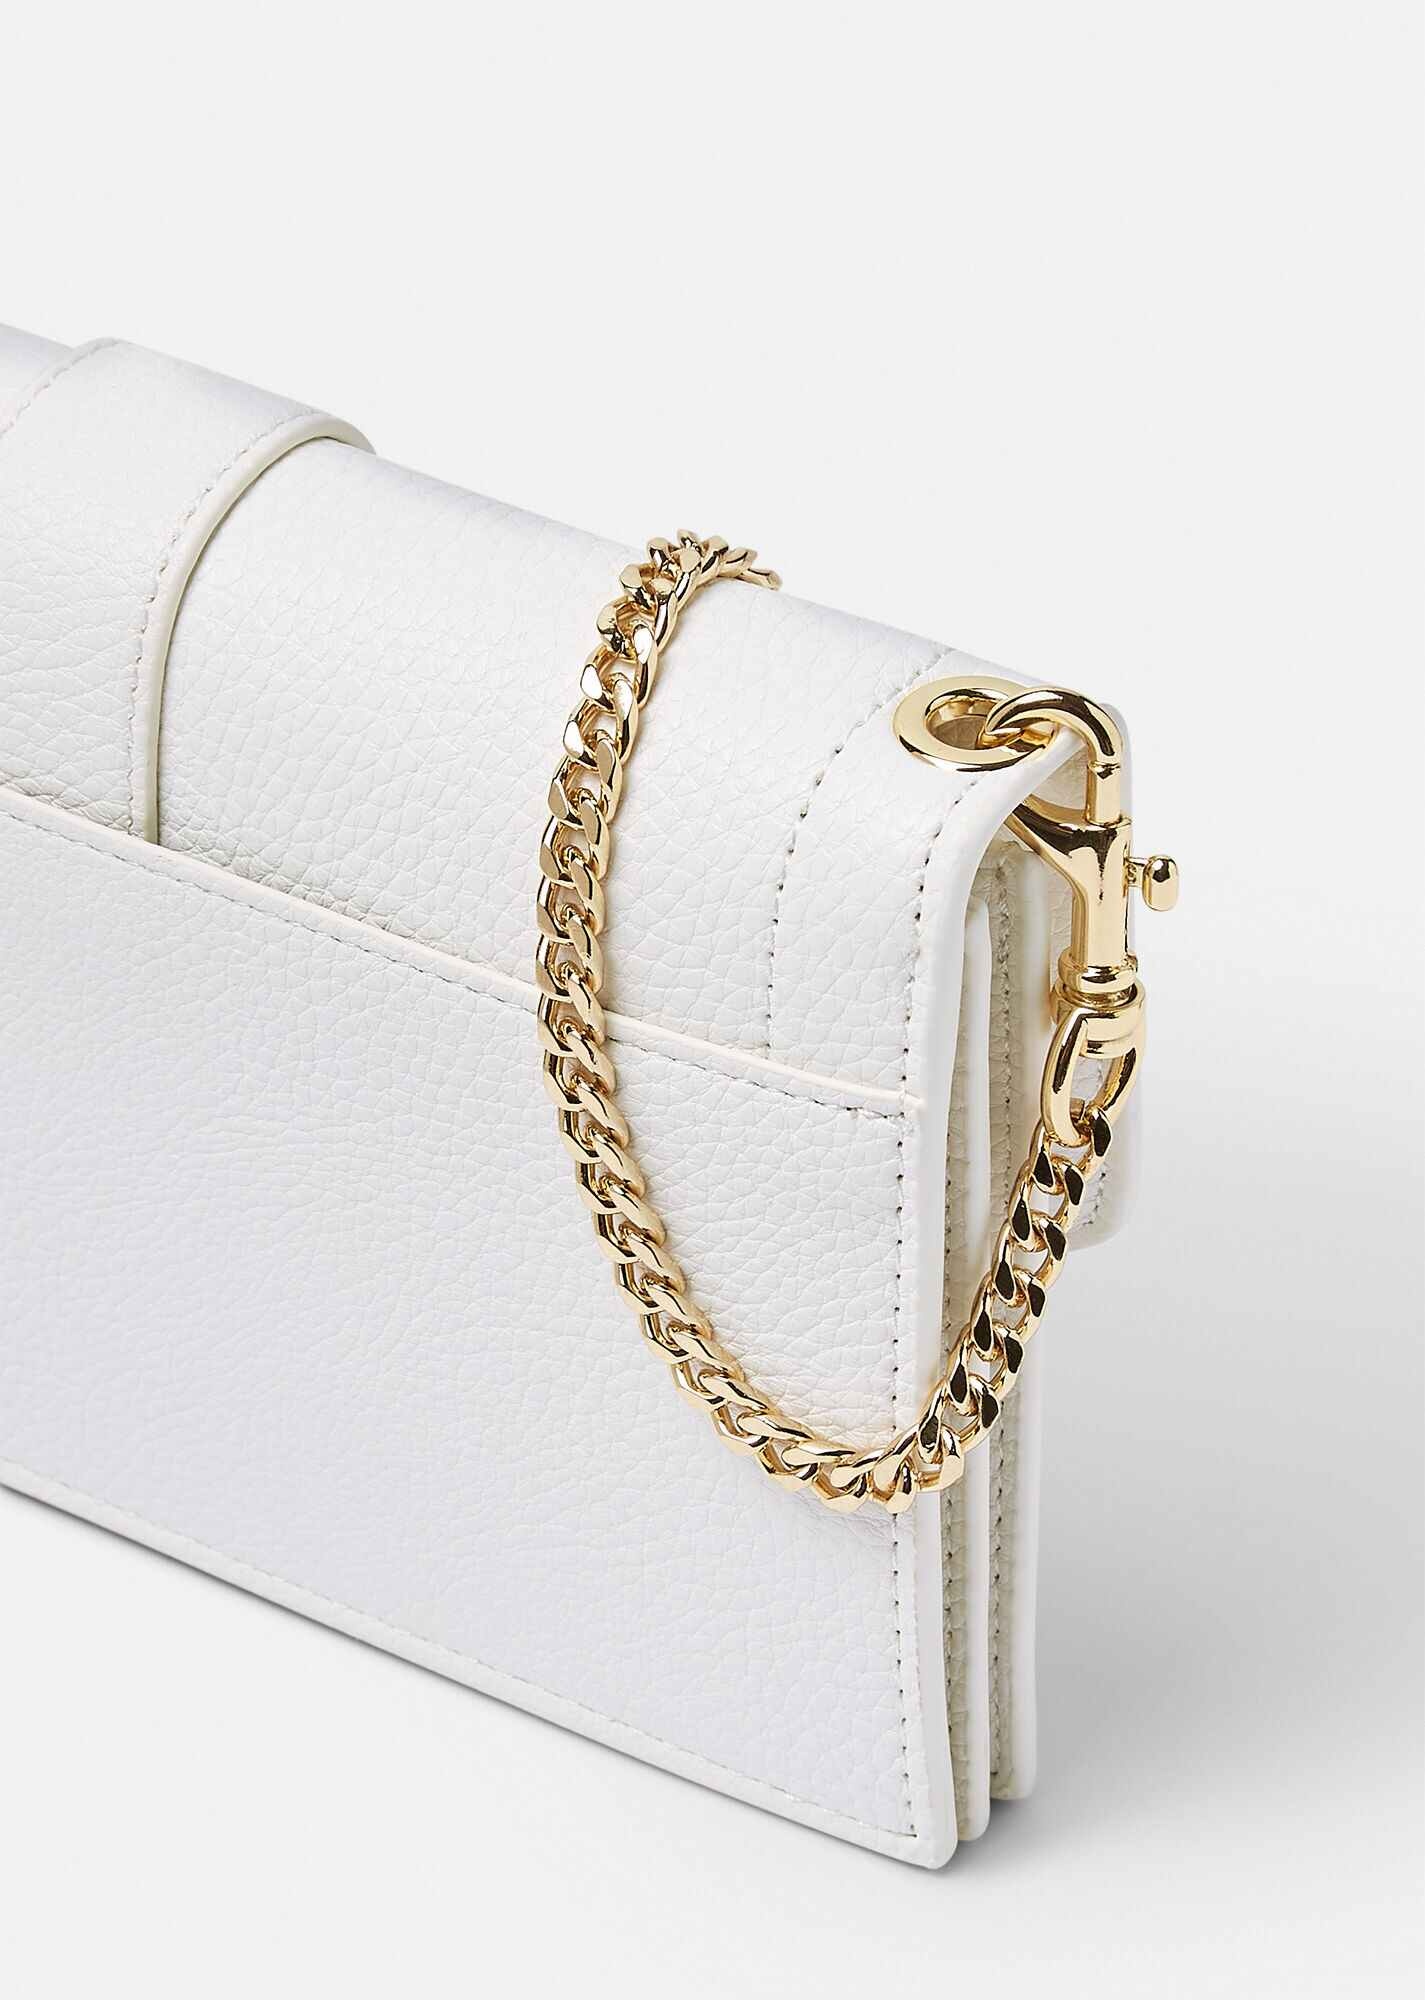 Couture 1 Chain Wallet - 5